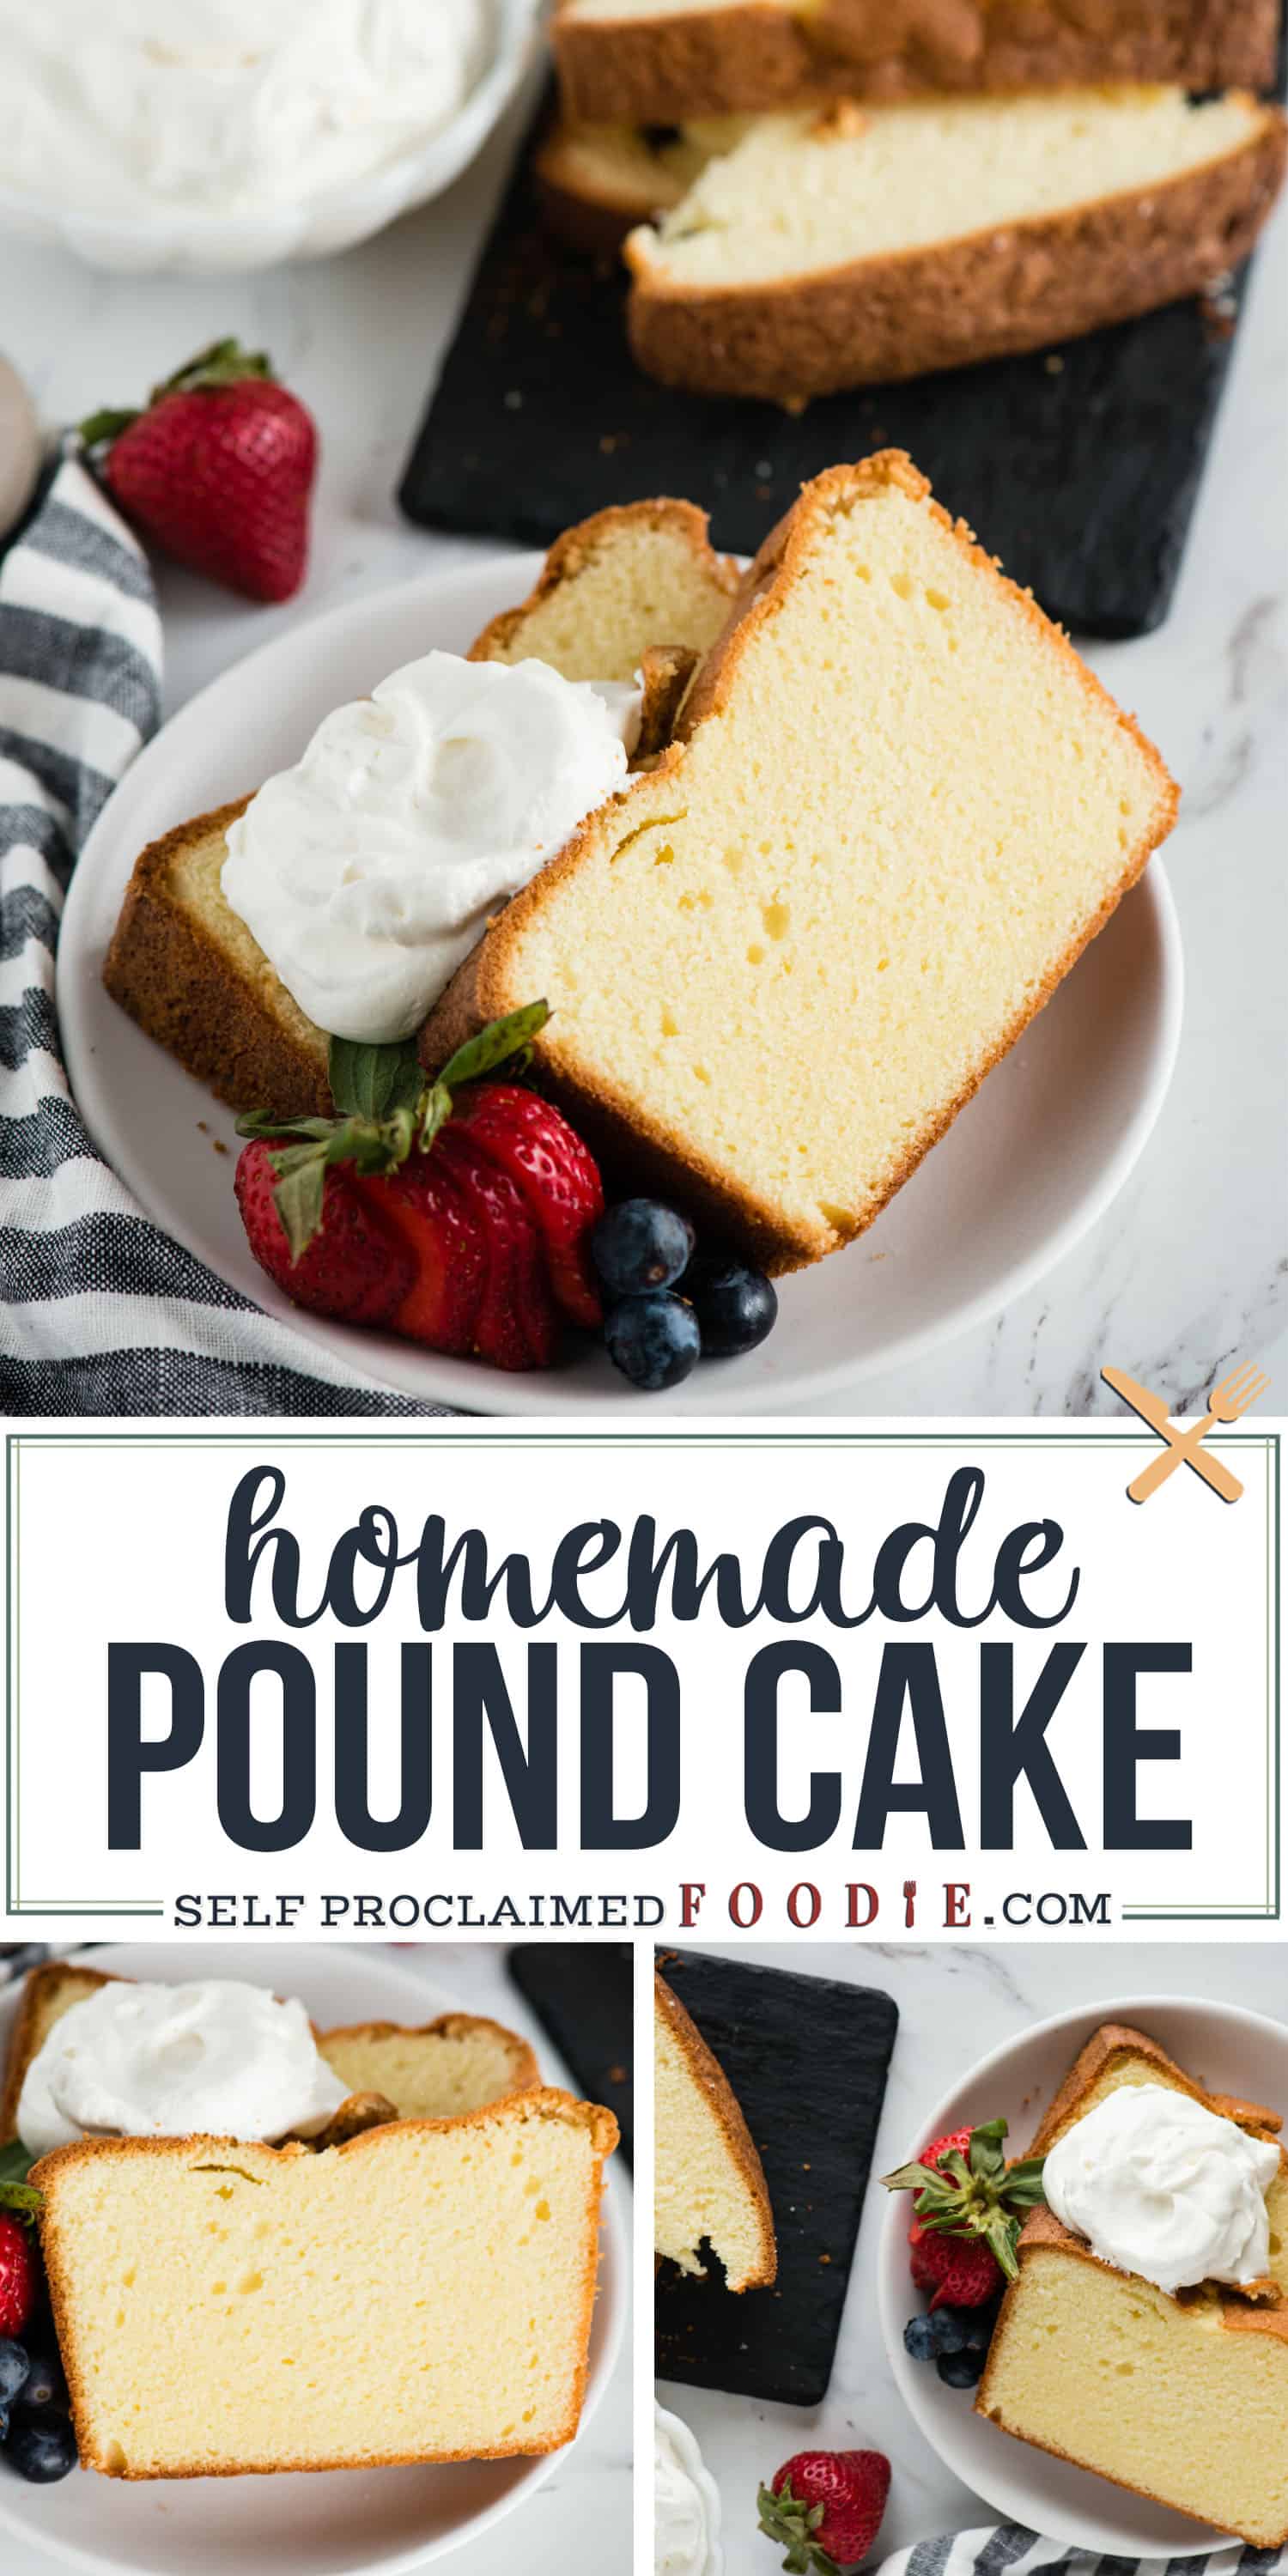 The BEST {Cream Cheese} Pound Cake Recipe - Self Proclaimed Foodie